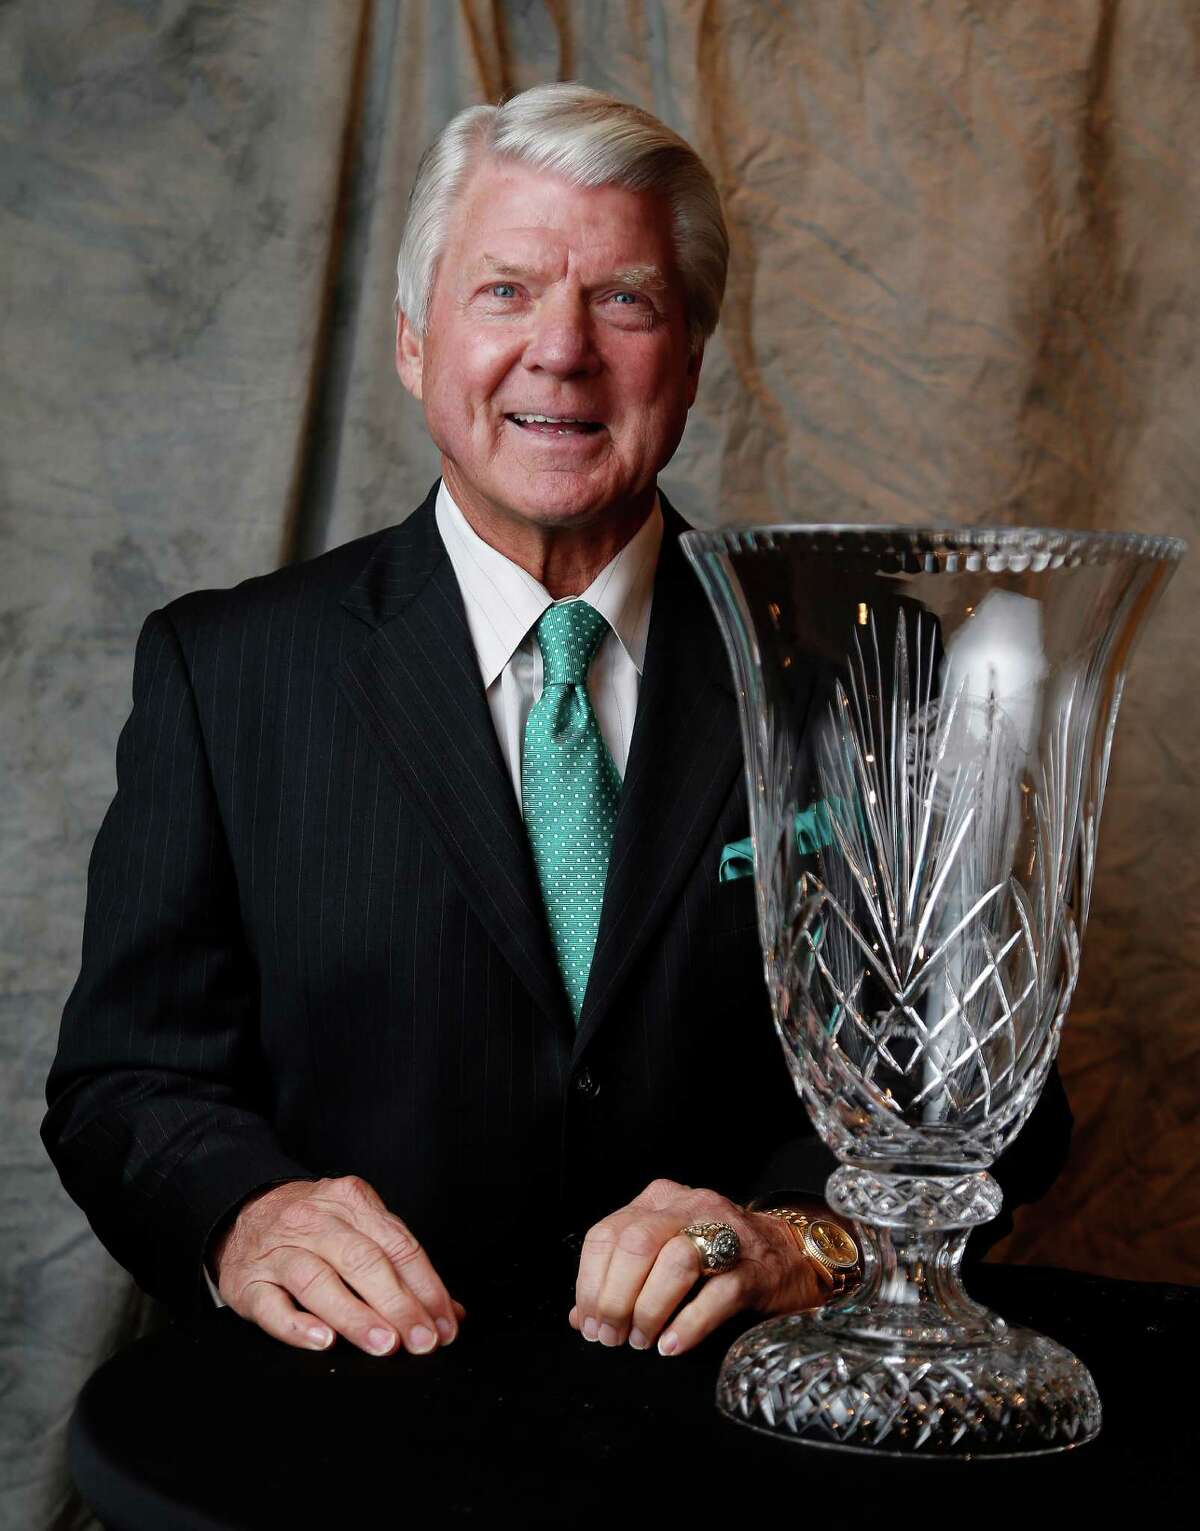 Jimmy Johnson photographed with the 2015 Lifetime Achievement Award before the start of the 2015 Paul "Bear" Bryant Awards at the Hilton Americas, Wednesday, Jan. 14, 2015, in Houston. The Lifetime Achievement Award recognizes excellence in coaching during a career.